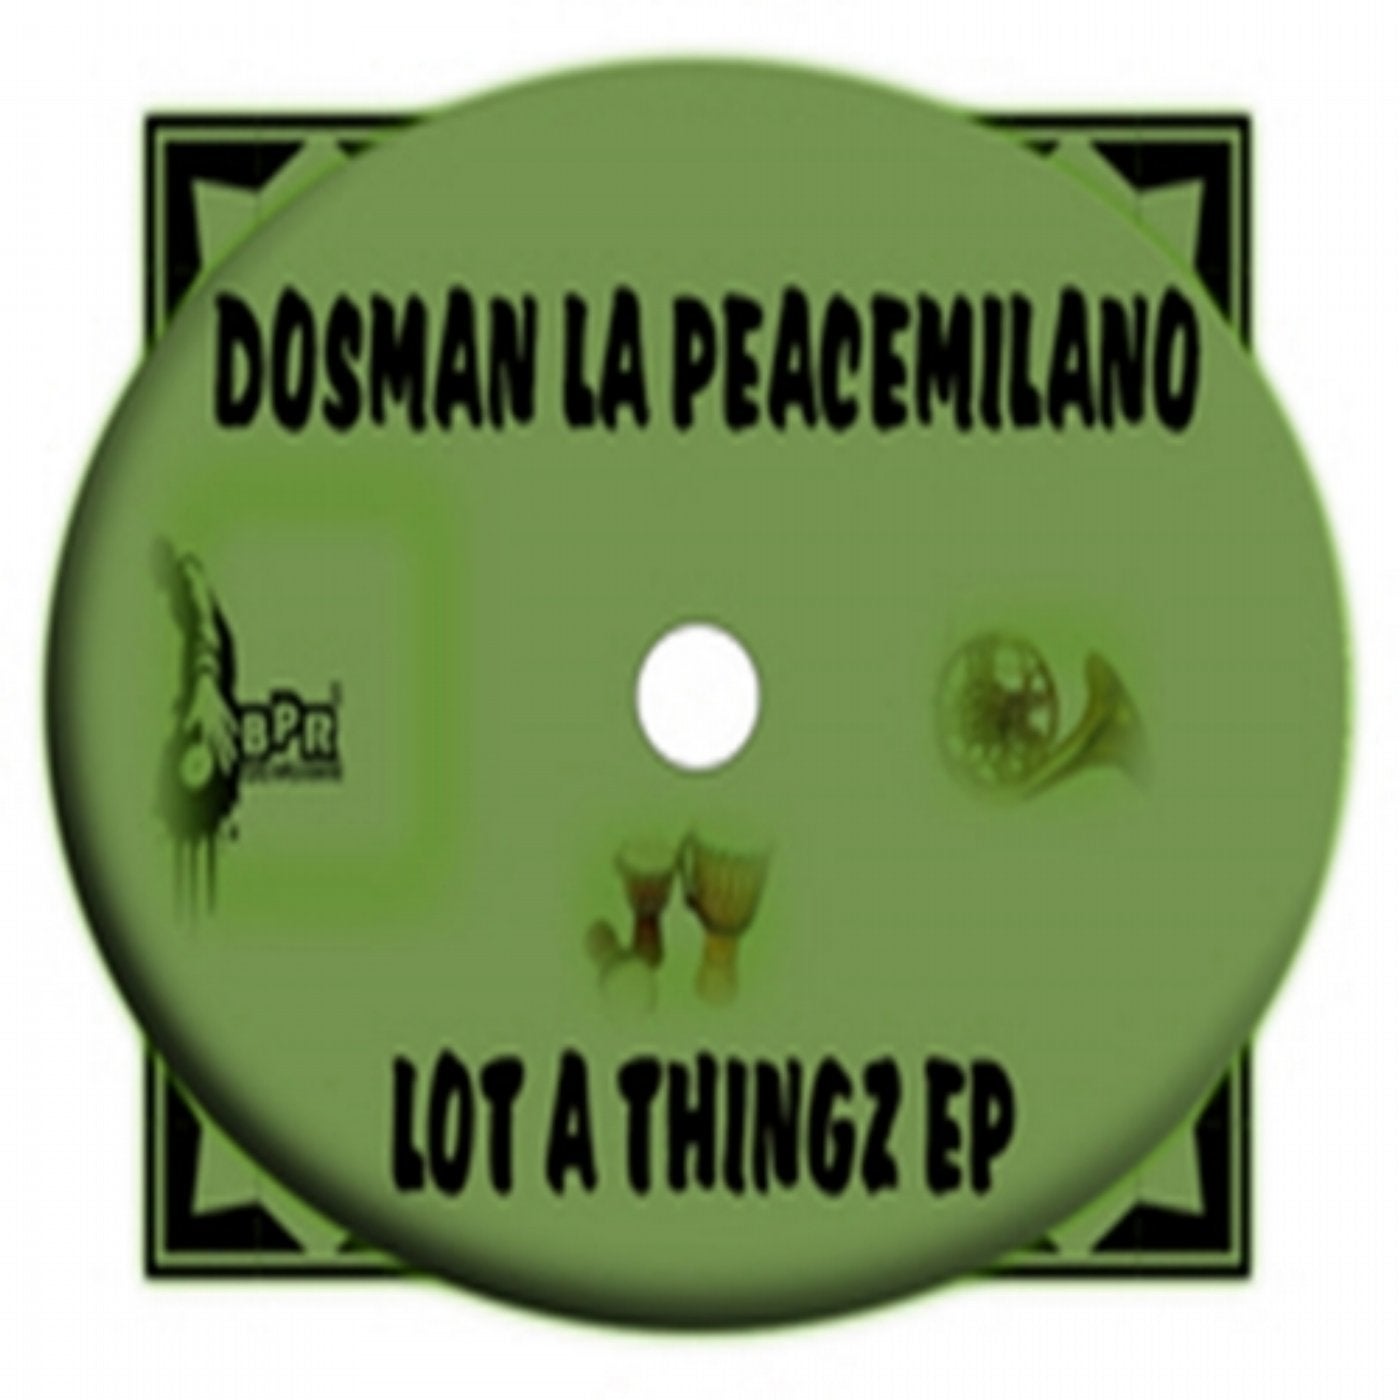 Lot A Thingz EP